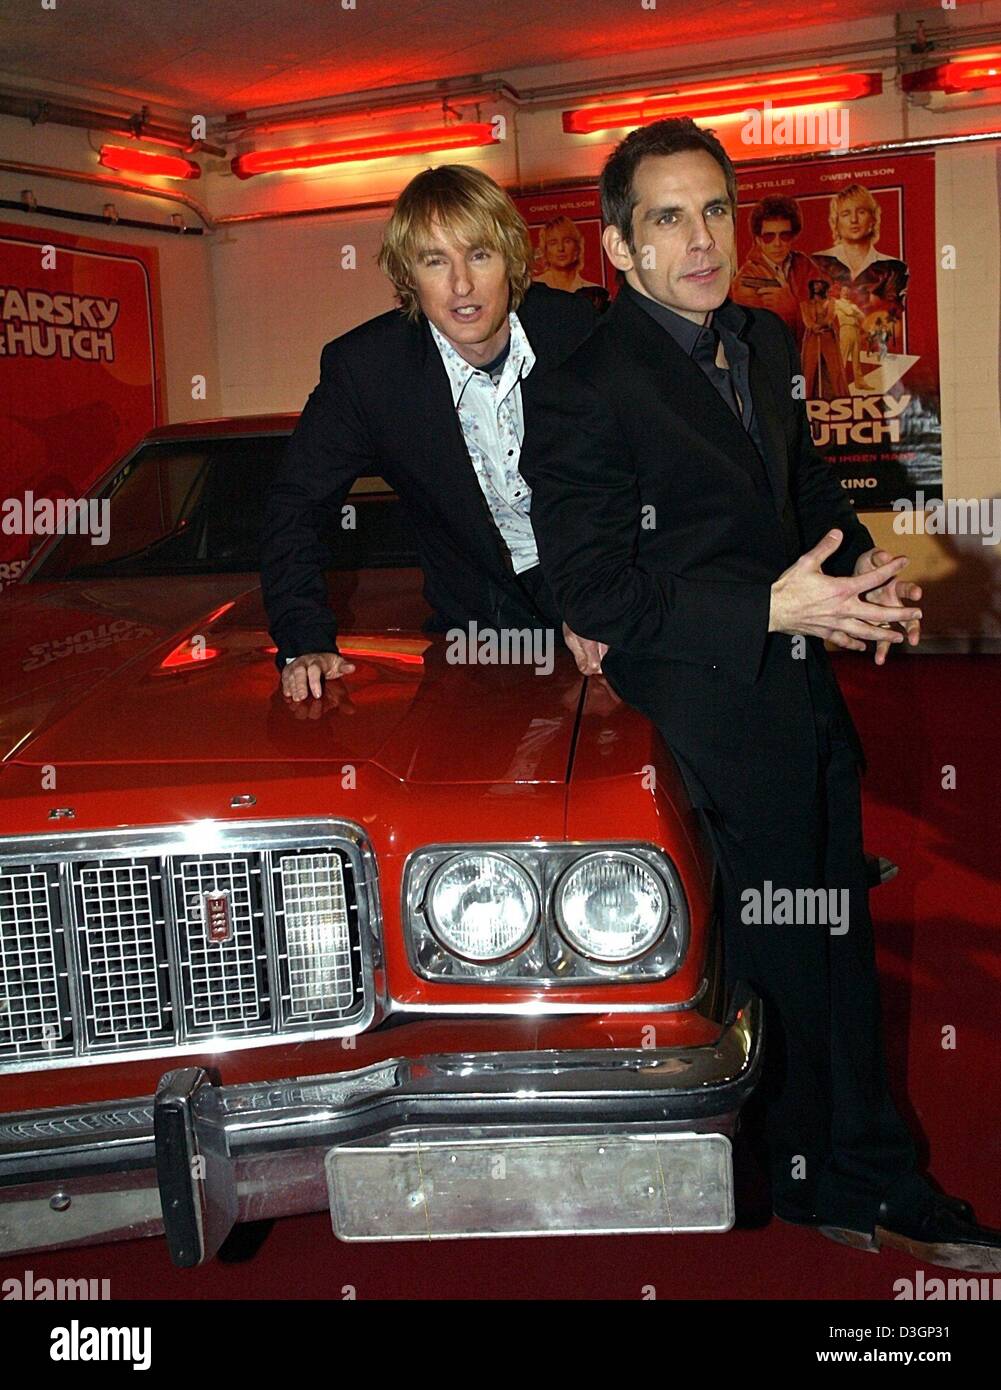 (dpa) - US actors Owen Wilson and Ben Stiller (R) pose on the hood of their film car, a glaring red Ford Gran Torino, at the premiere of their film 'Starsky & Hutch' in Munich, 9 March 2004. Owen and Stiller play the cop duo Ken Hutchinson and David Starsky in the remake of the legendary 1970's television series. The red car with a white rallye stripe at the sides was the trademark Stock Photo